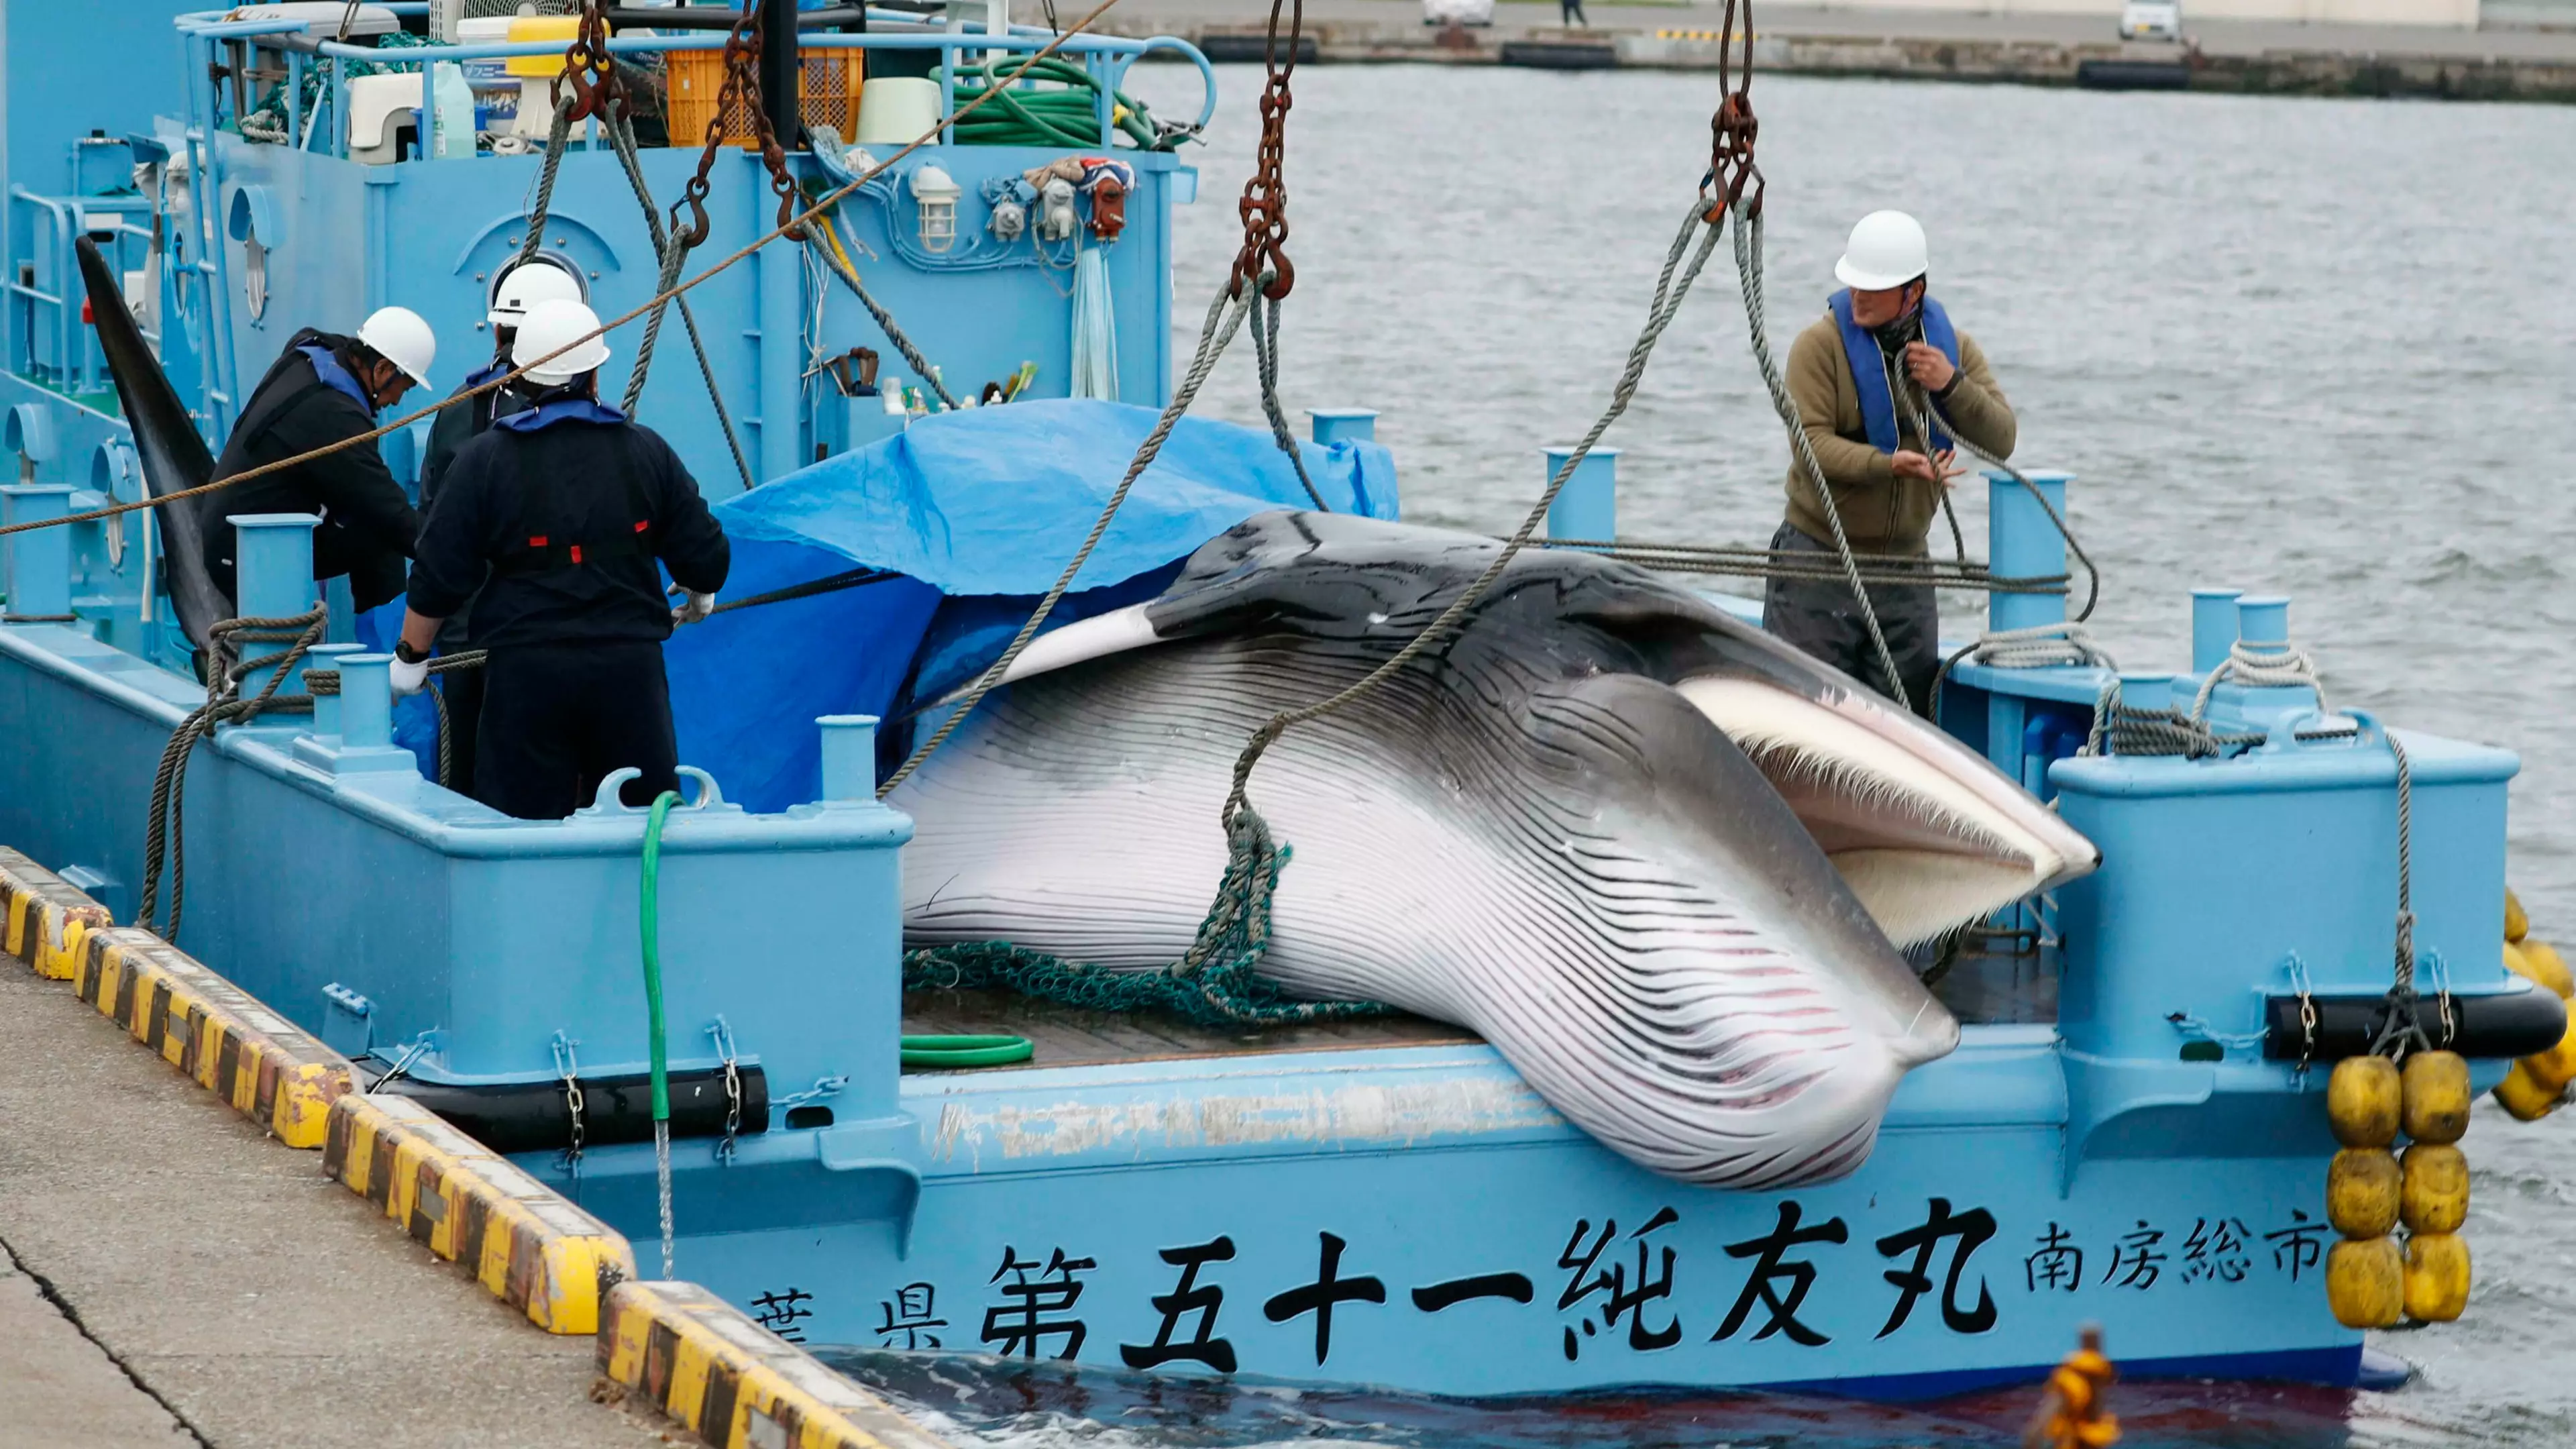 Japan Resumes Commercial Whaling After A 31-Year Break